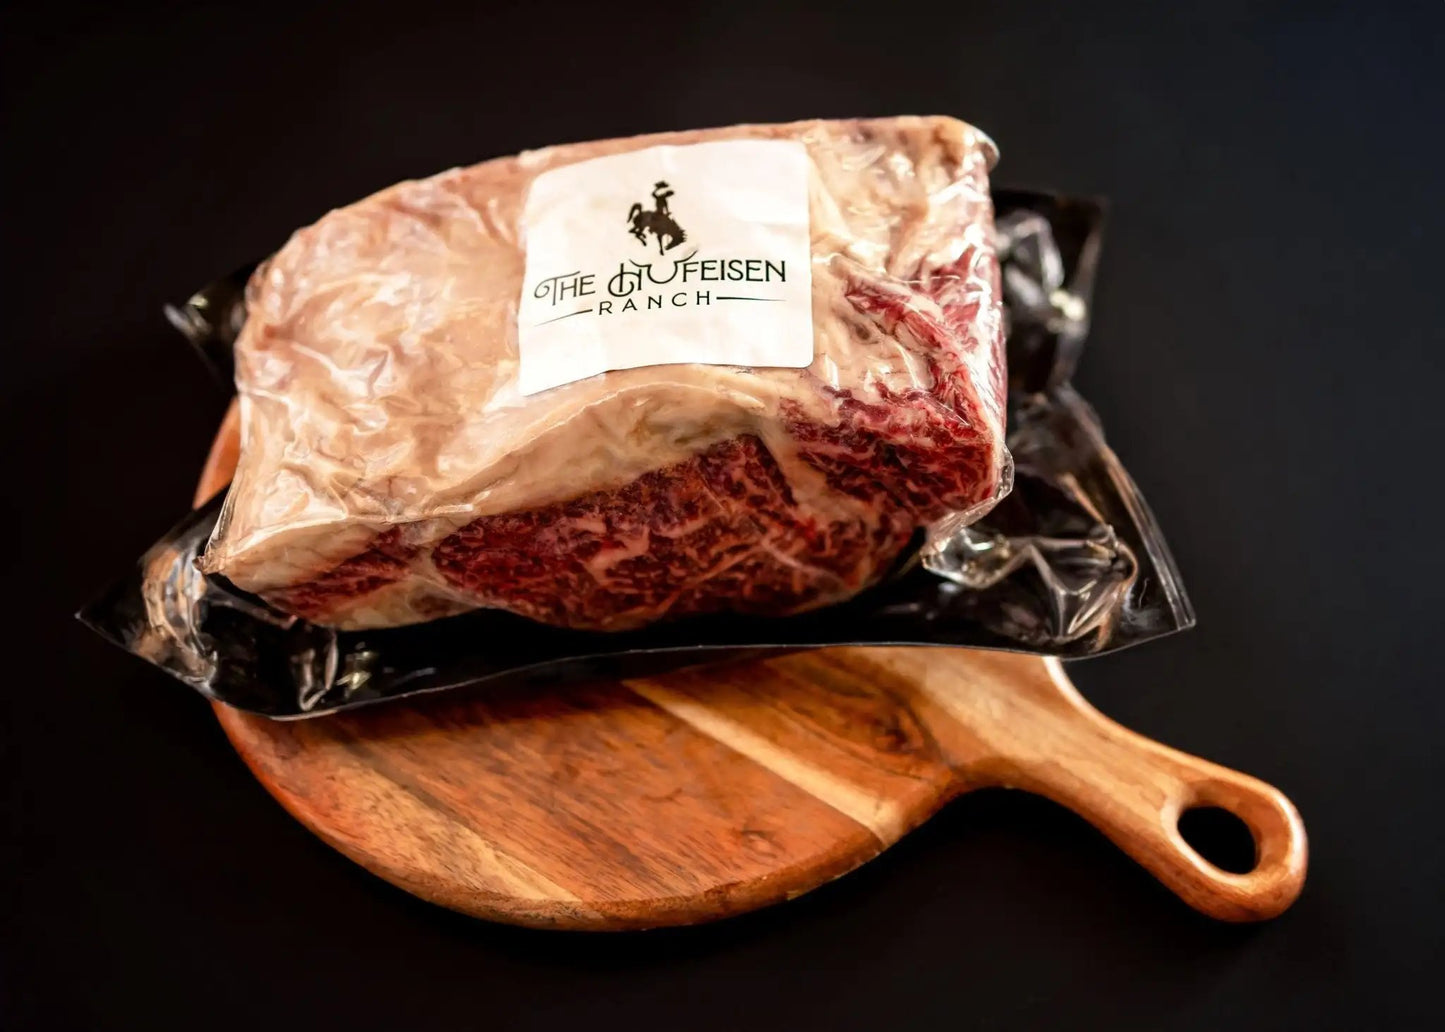 100% All-Natural Grass-Fed Pasture-Raised Wagyu Boneless Rib Roast



















Introducing the epitome of indulgence – our Grass-Fed Pasture-Raised Wagyu Rib Roast. Unparalleled in marbling and succulence, this premium cut i100%The Hufeisen-Ranch (WYO Wagyu)